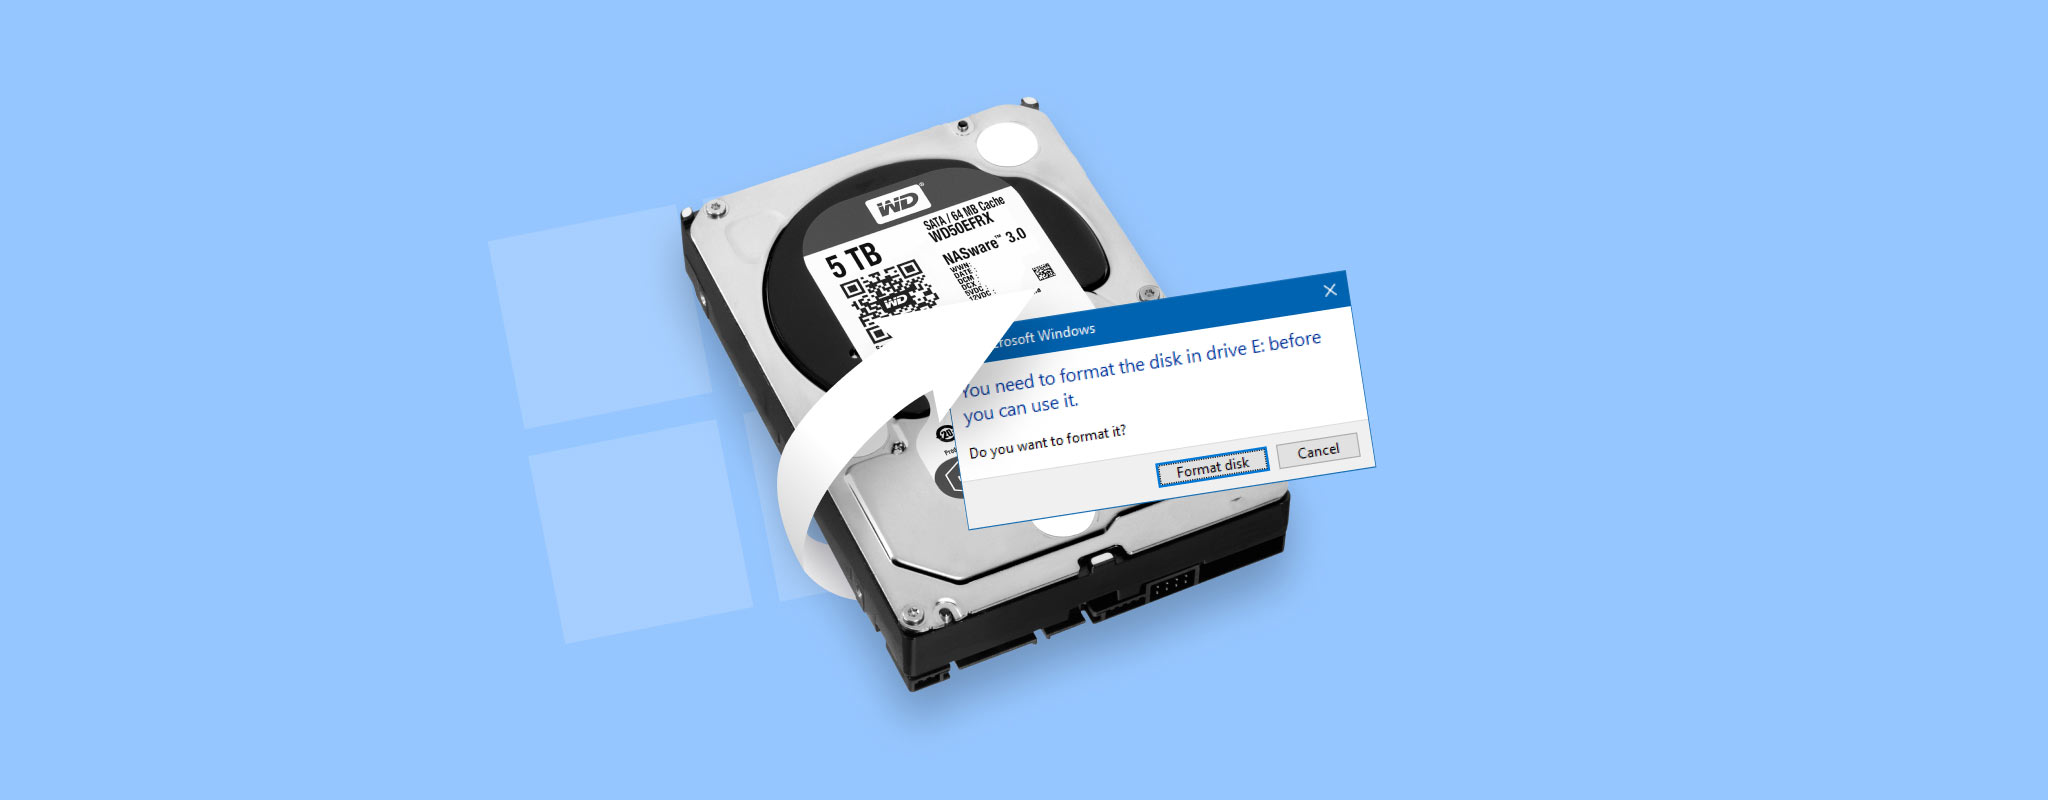 how to unformat hard drive